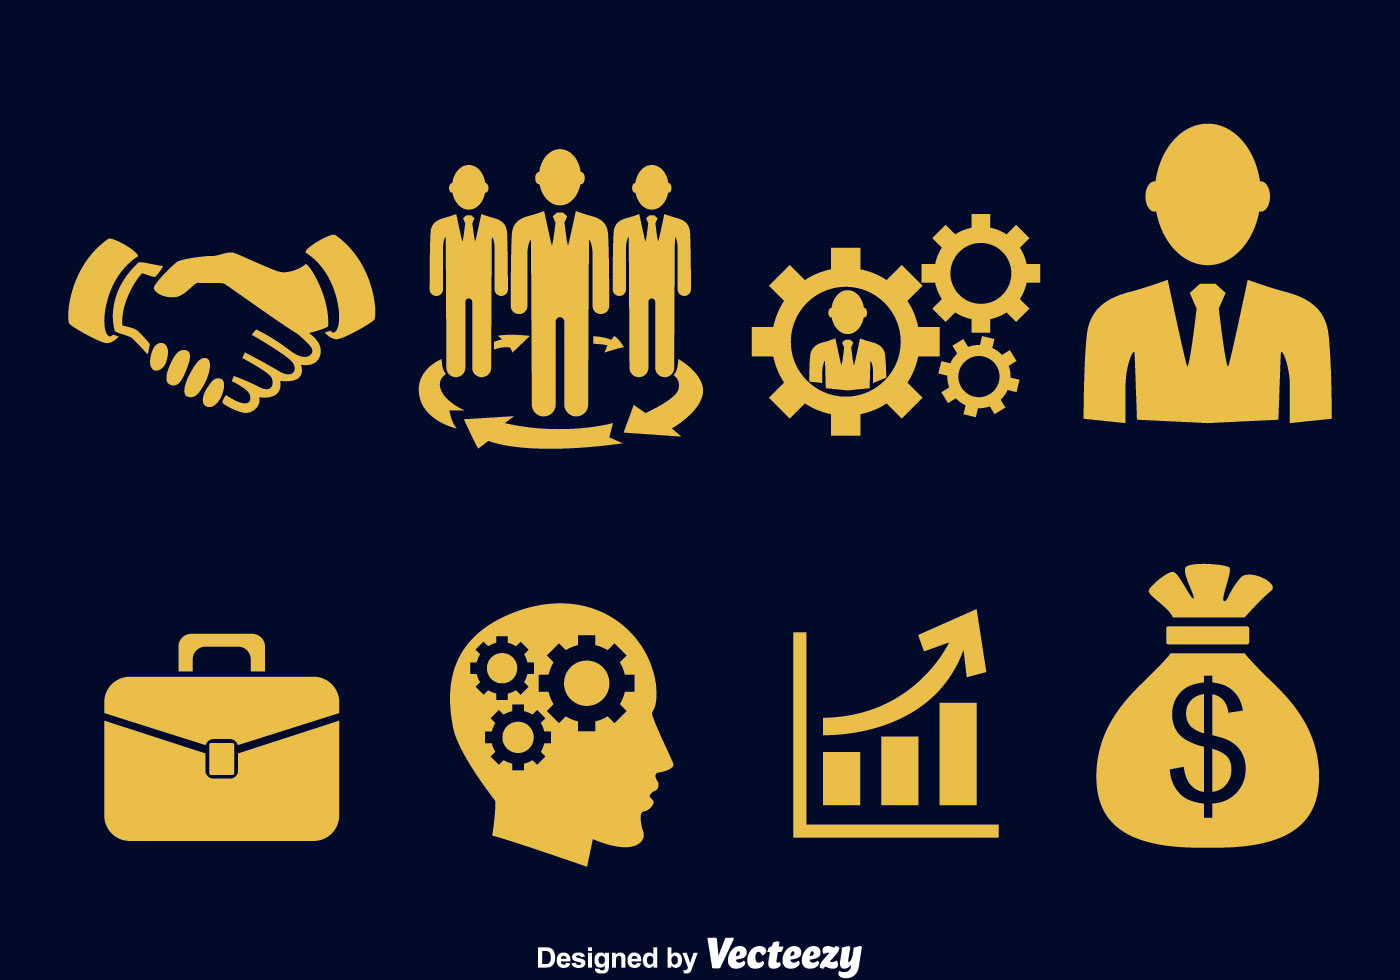 Download Business Icons Vector 118249 - Download Free Vectors ...